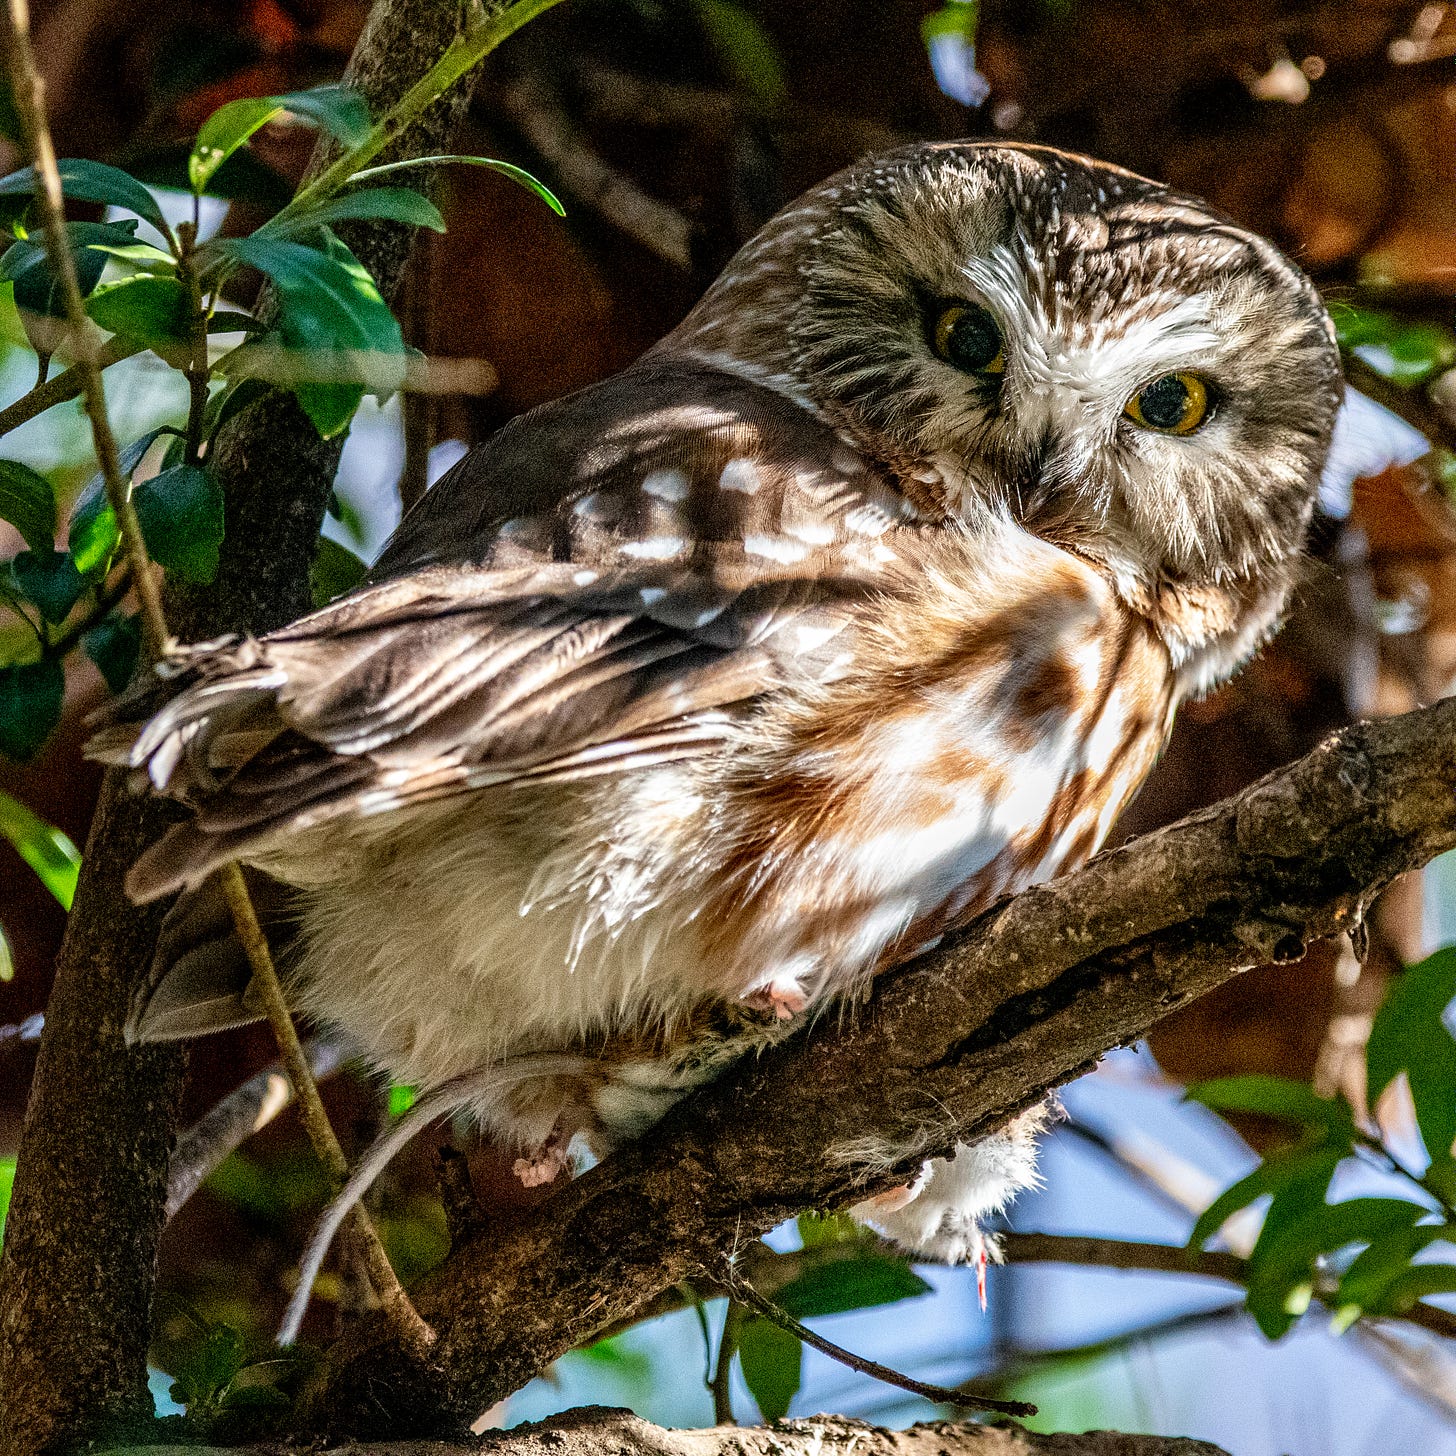 A Northern saw-whet owl is staring at the viewer with yellow eyes, its russet chest raked by sun, while holding in its talons a mouse, the tail and one rear leg of which is just visible"